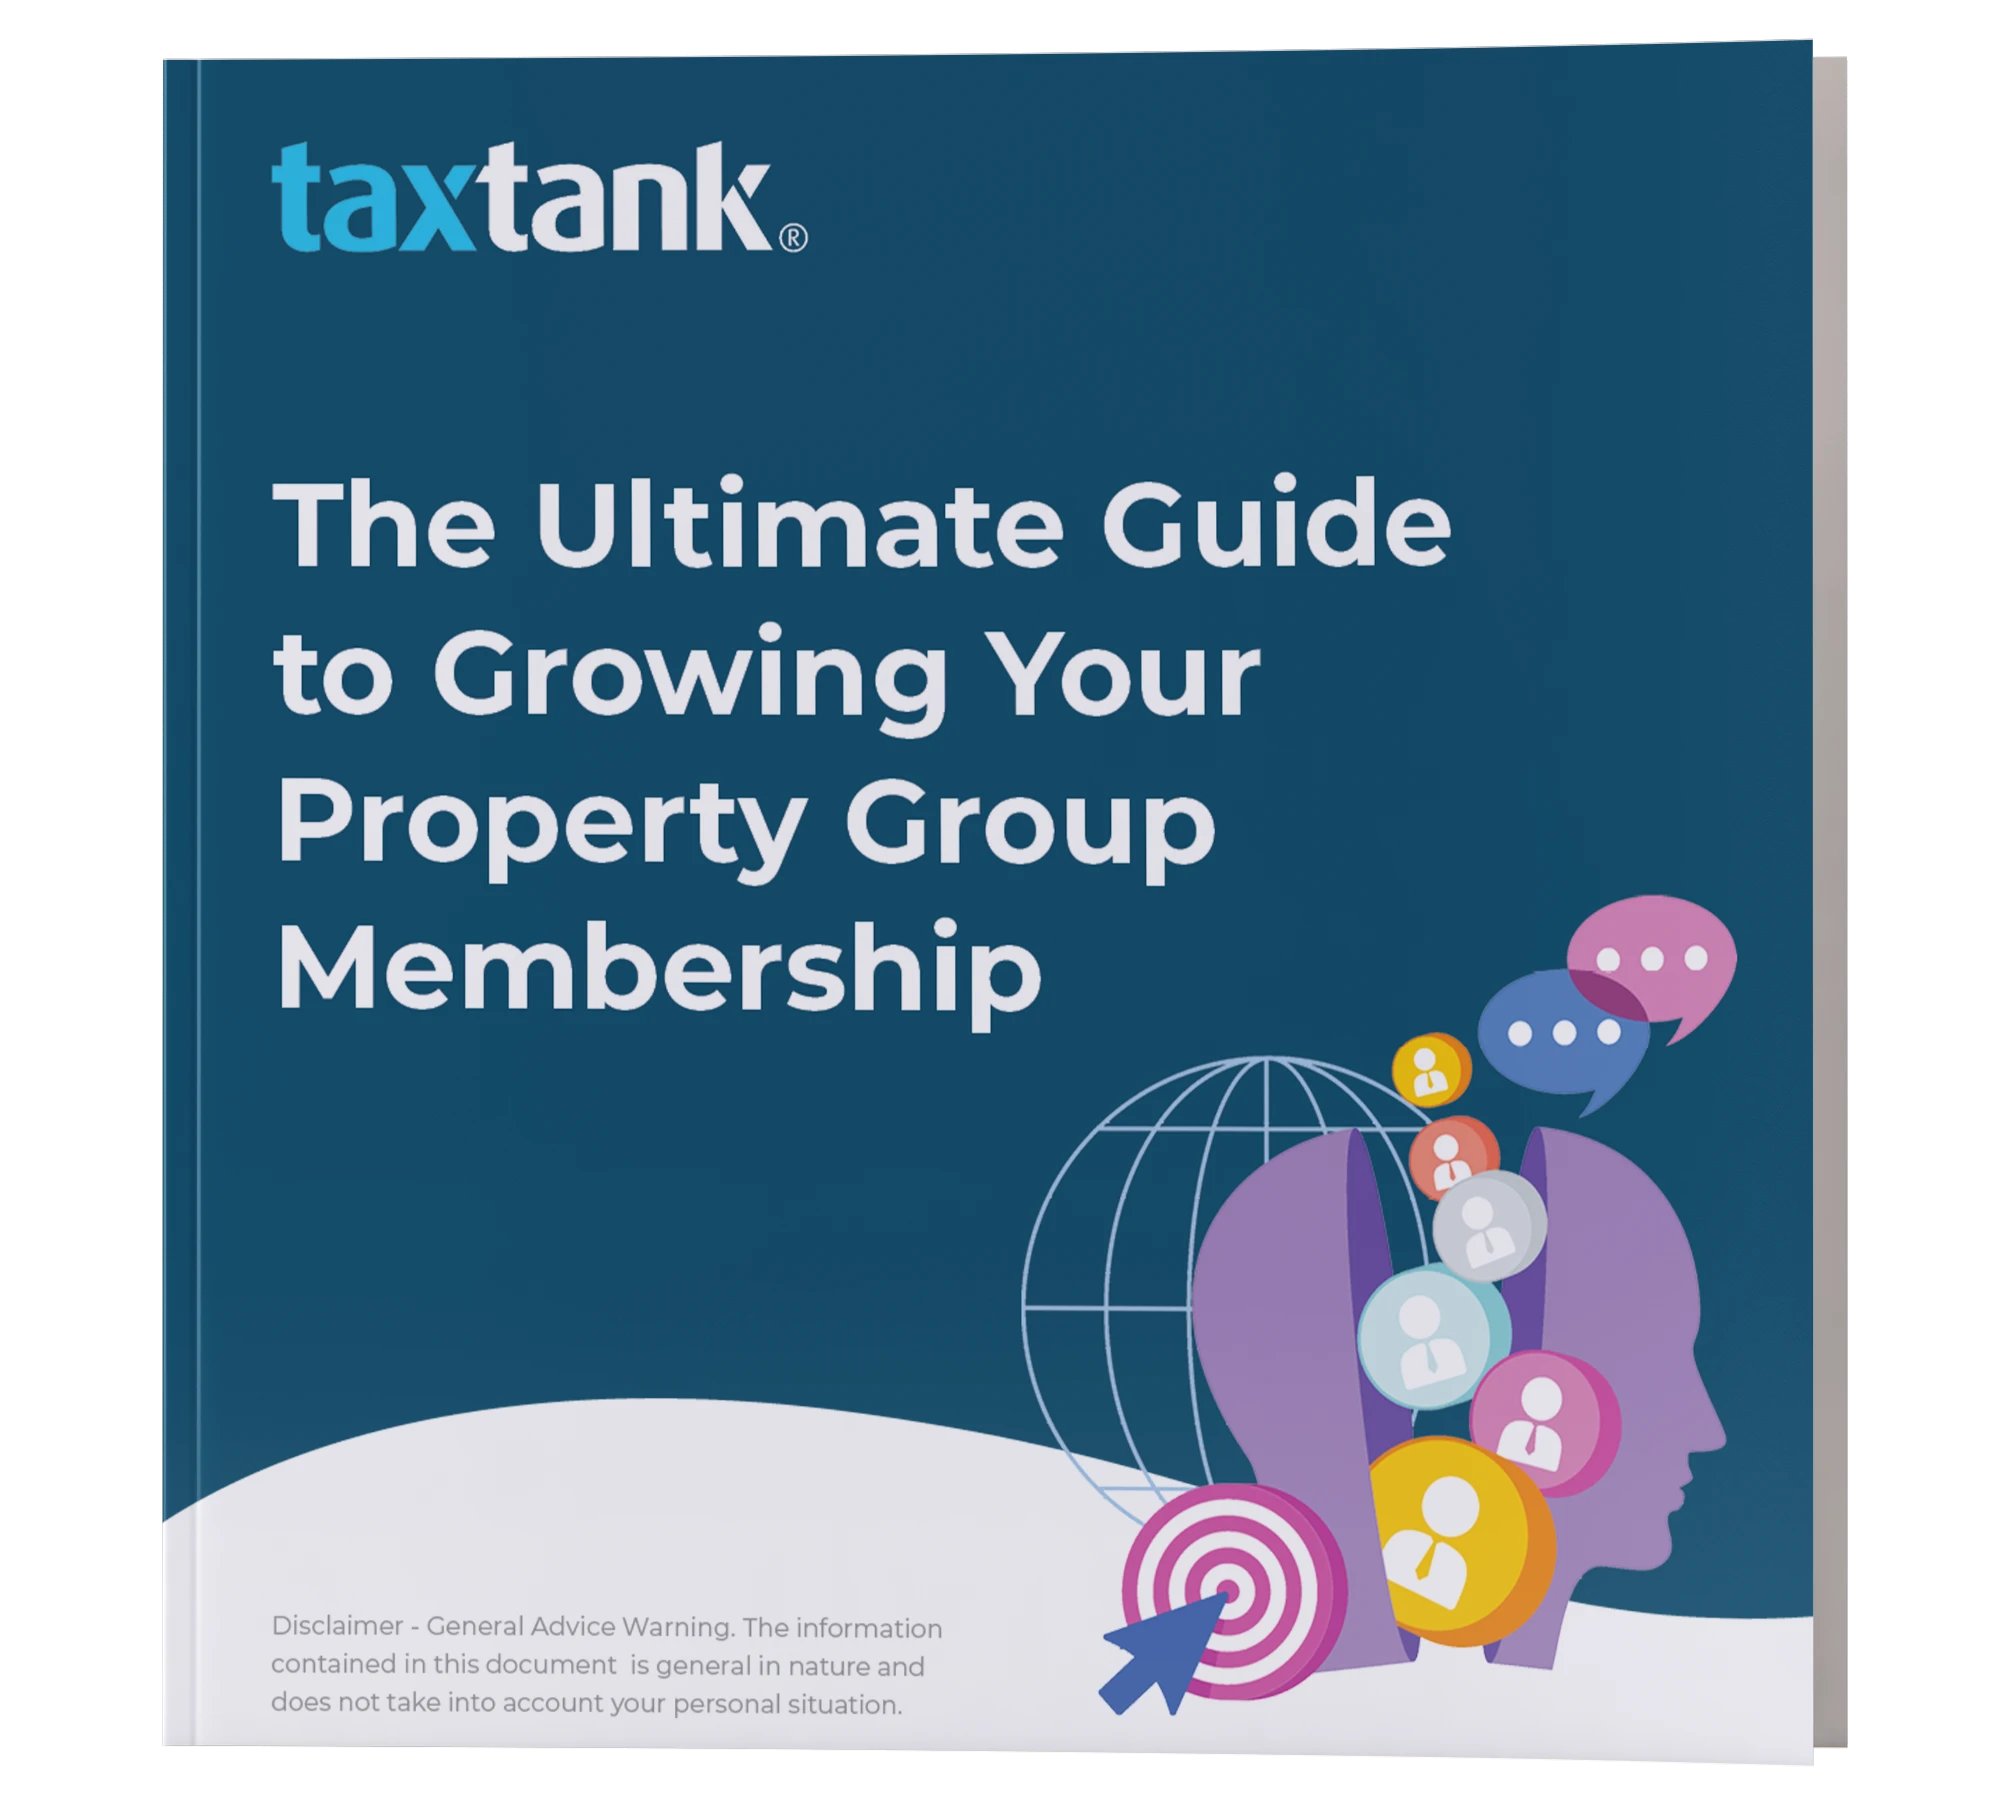 The Ultimate Guide to Growing Your Property Group Membership book cover